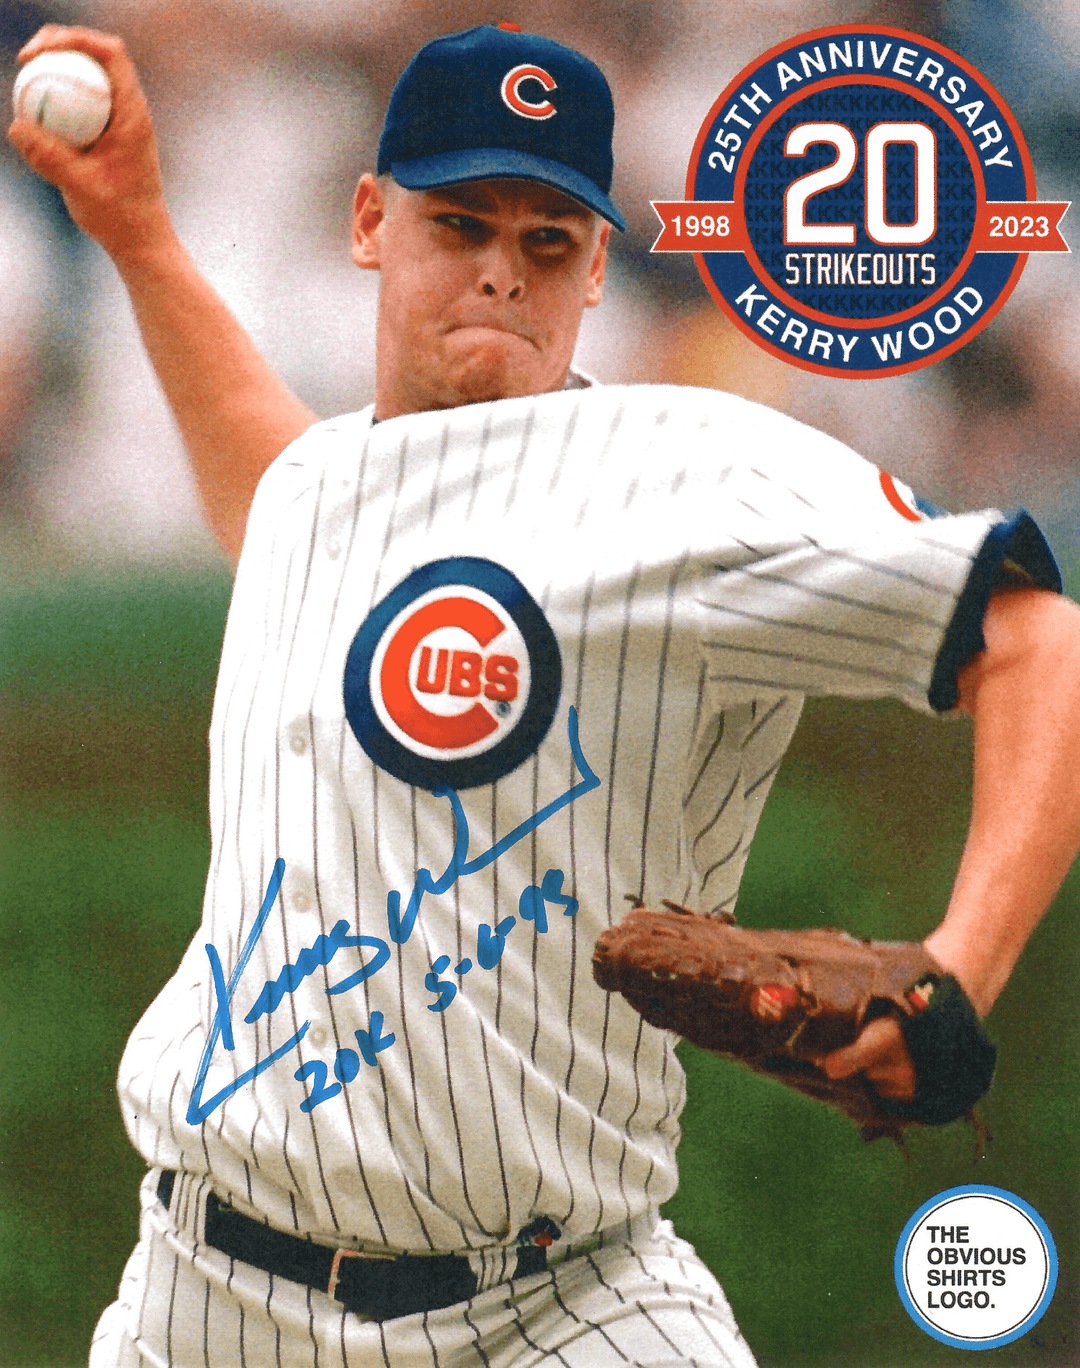 KERRY WOOD 25TH ANNIVERSARY SIGNED 20 STRIKEOUT 8x10 PHOTO – OBVIOUS SHIRTS